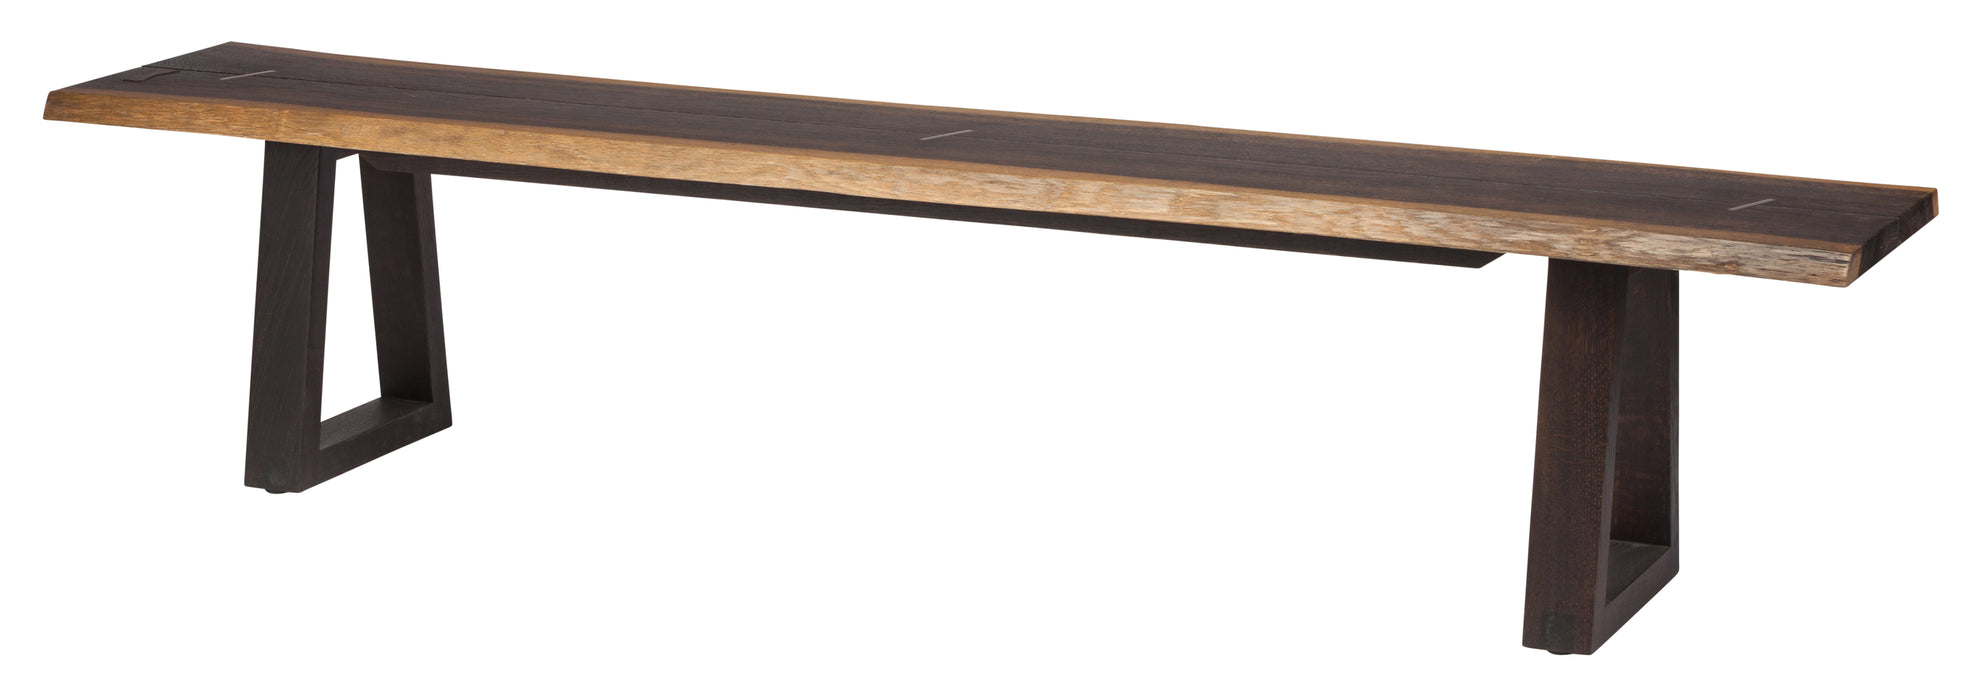 Napa PL Seared Dining Bench